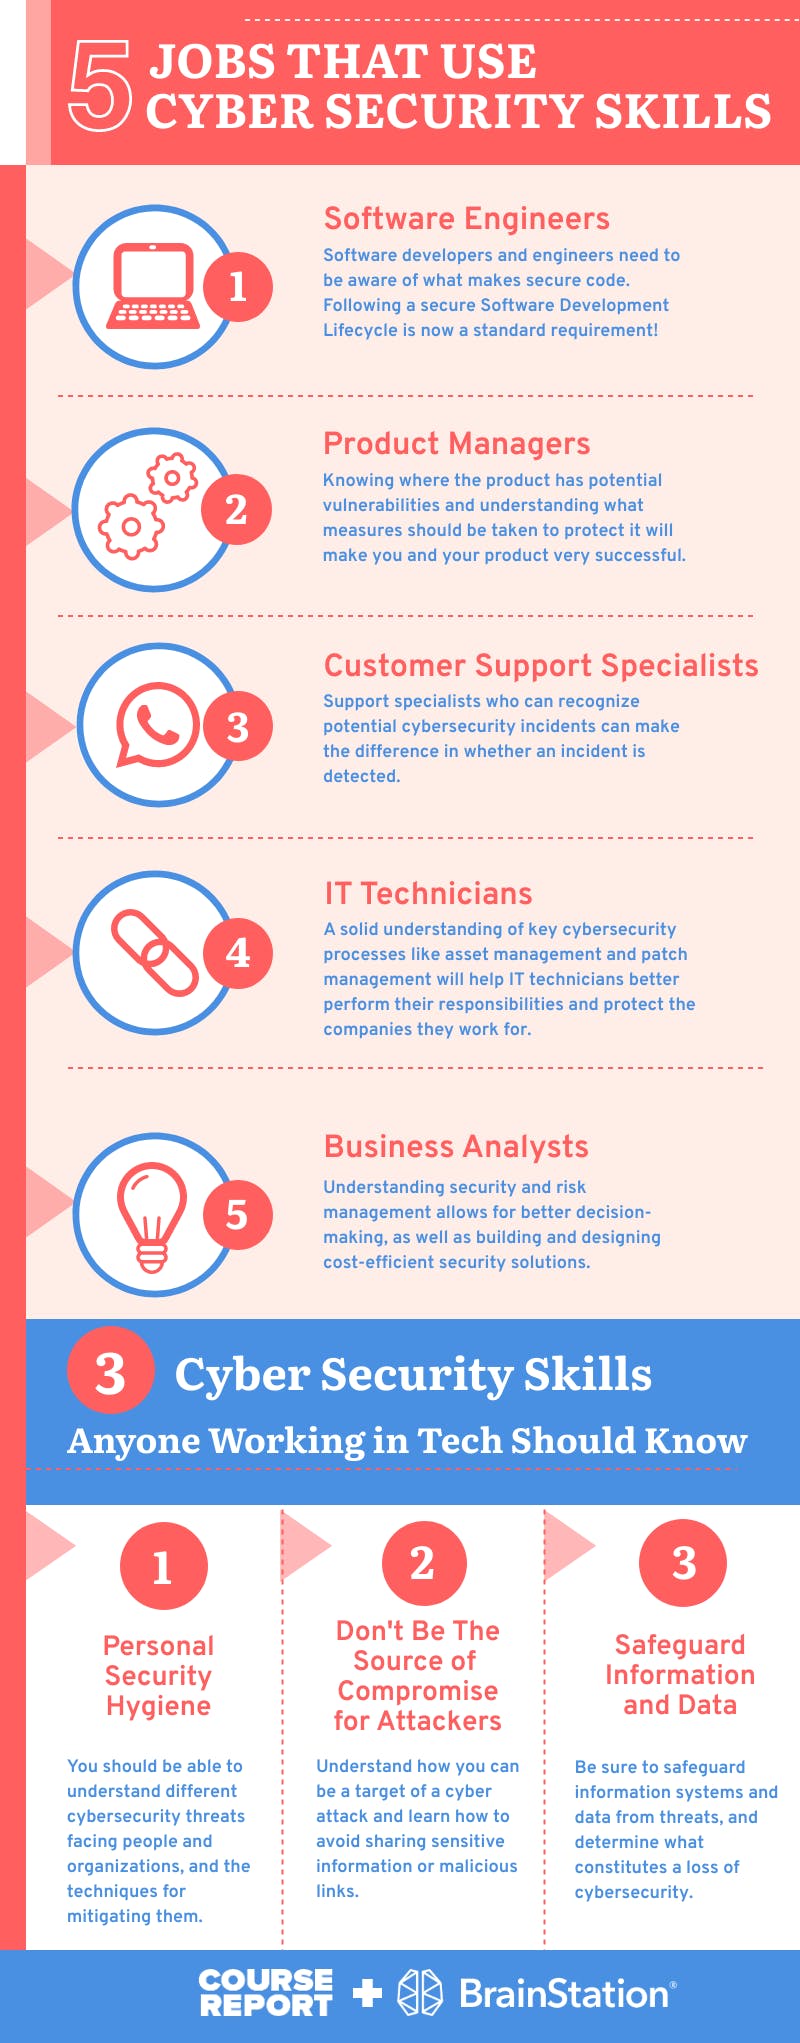 problem solving skills in cyber security